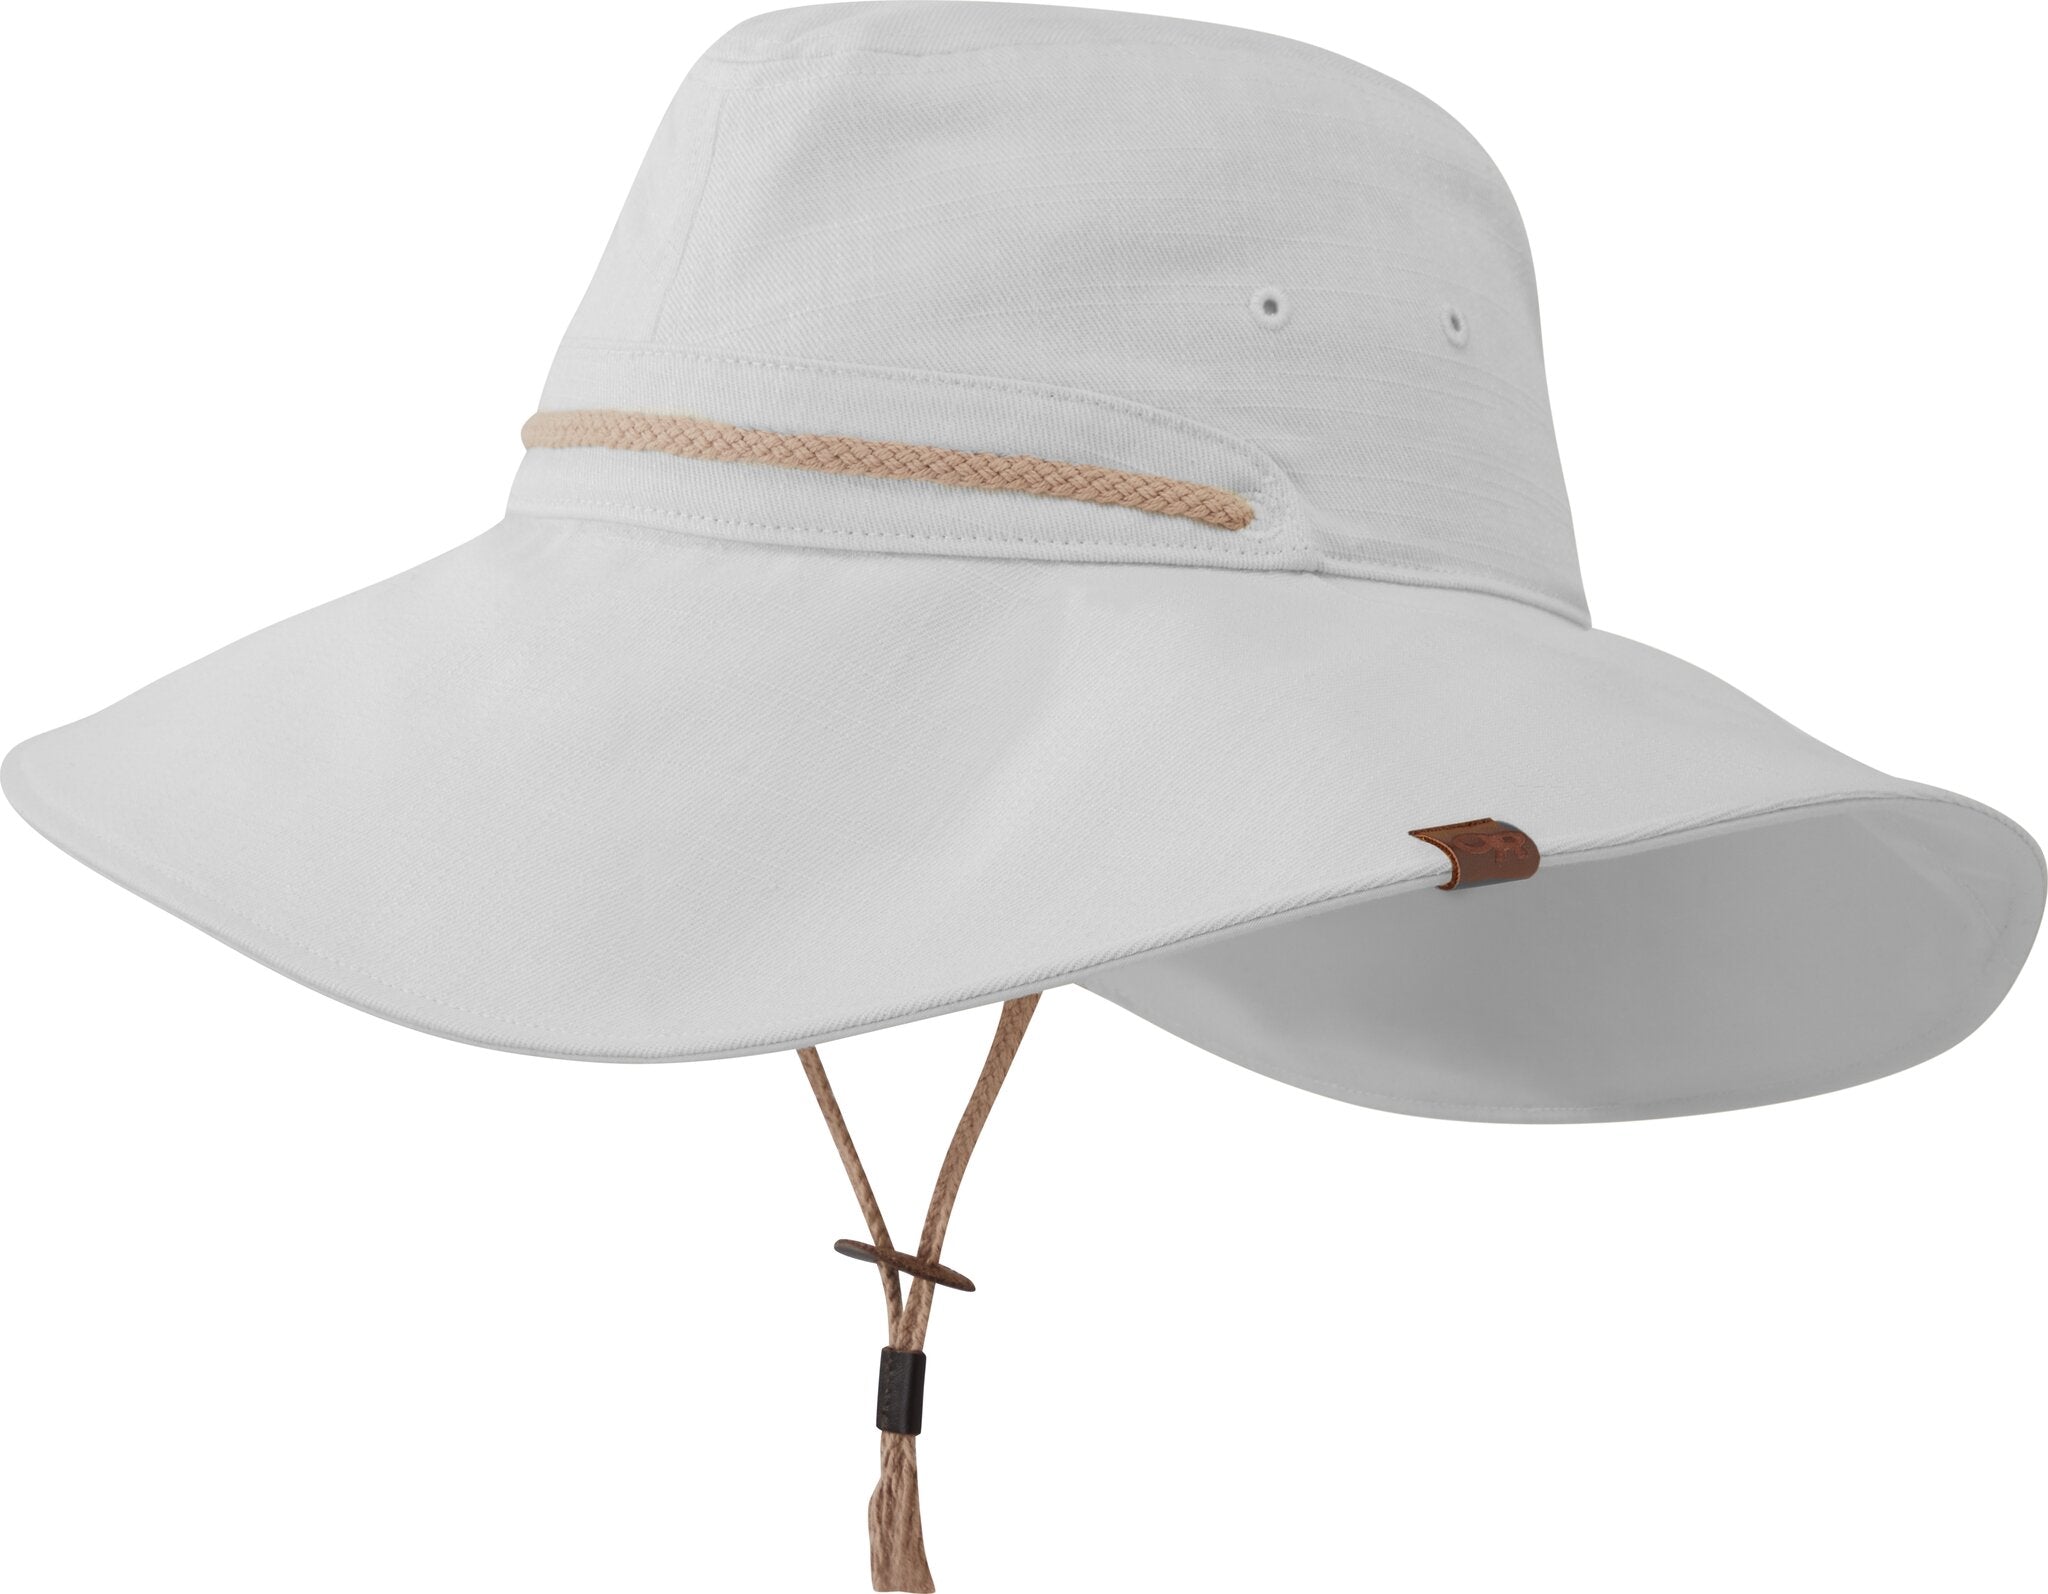 Outdoor Research Mojave Sun Hat - Women's S | M White